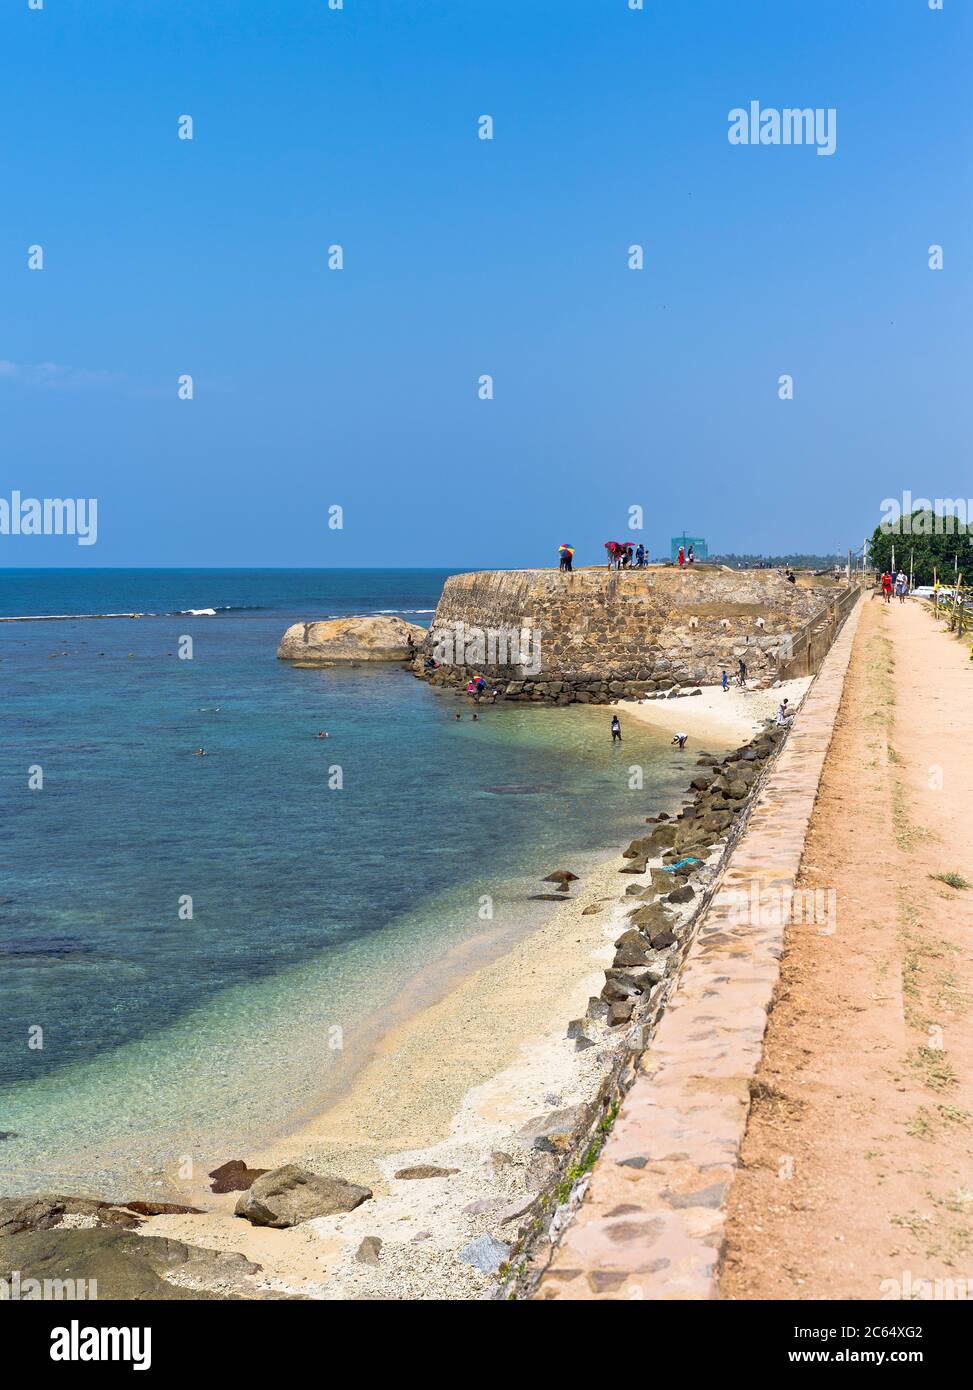 dh Colonial forts ramparts GALLE FORT SRI LANKA Dutch Fortress wall rampart battlements beach of people Stock Photo